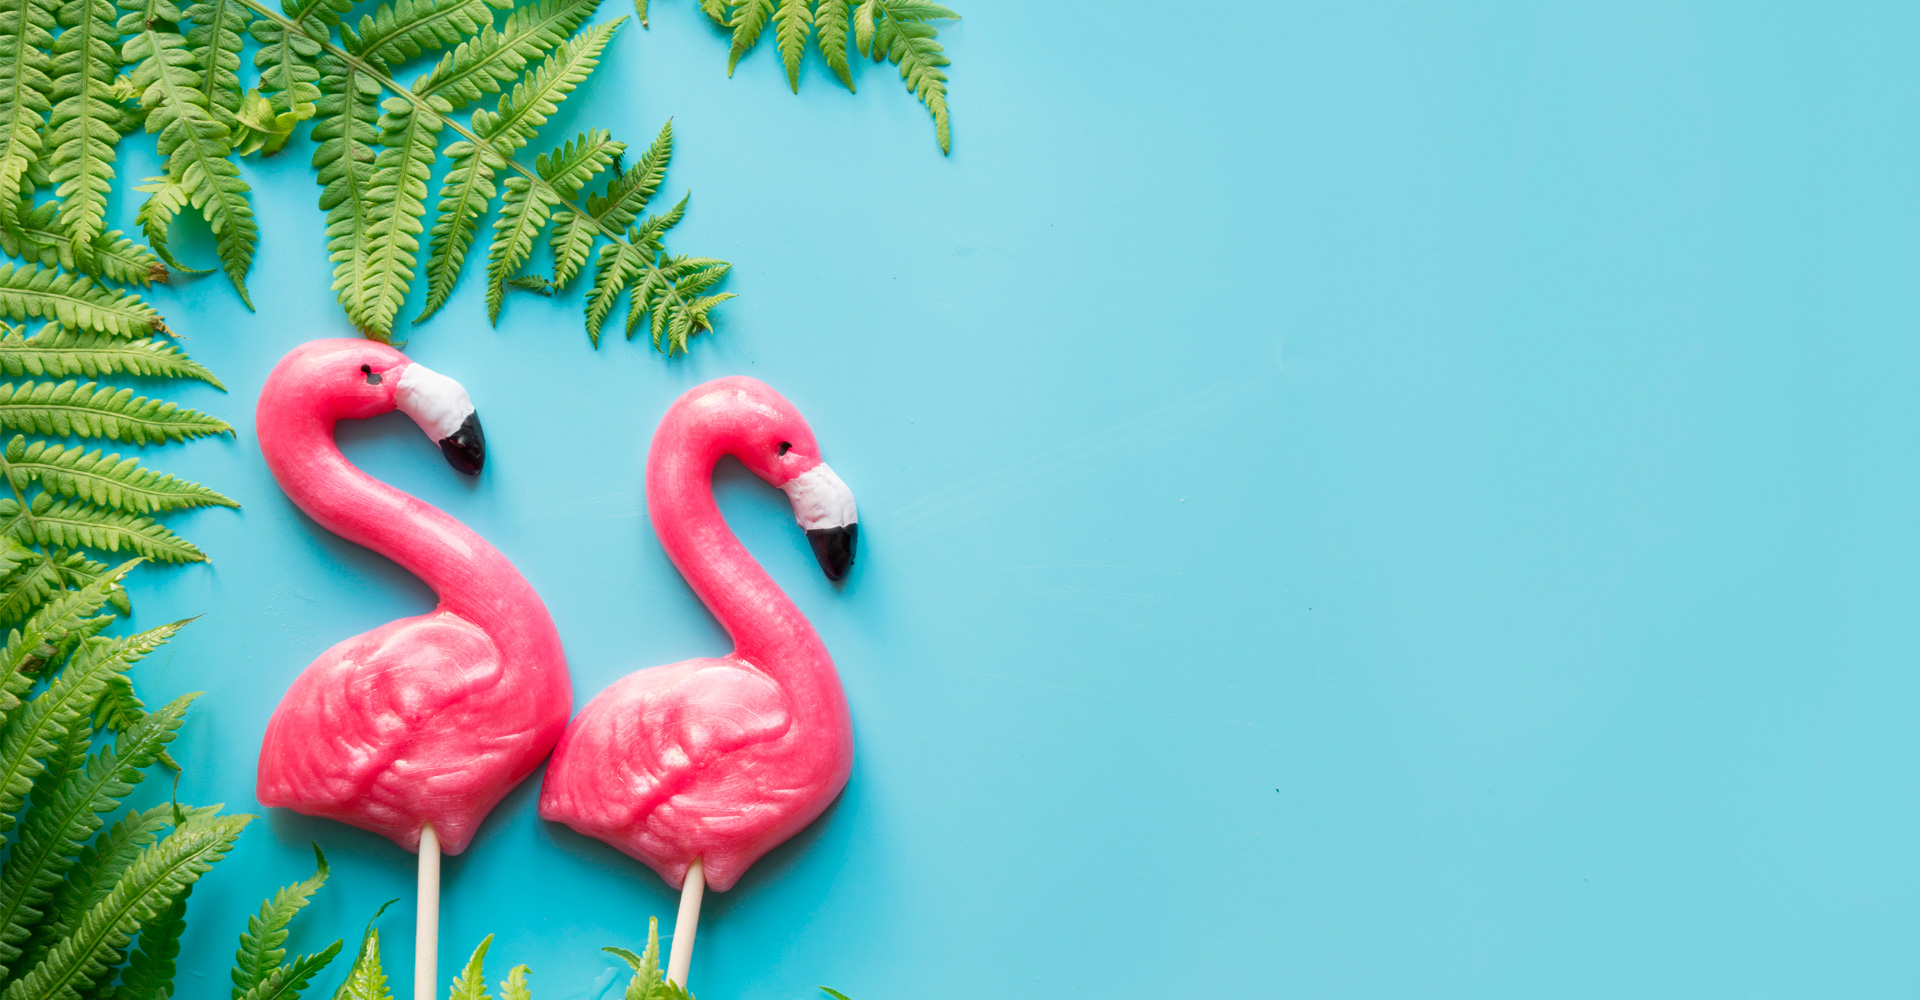 Flamingo lollipops and fern leaves on blue background.